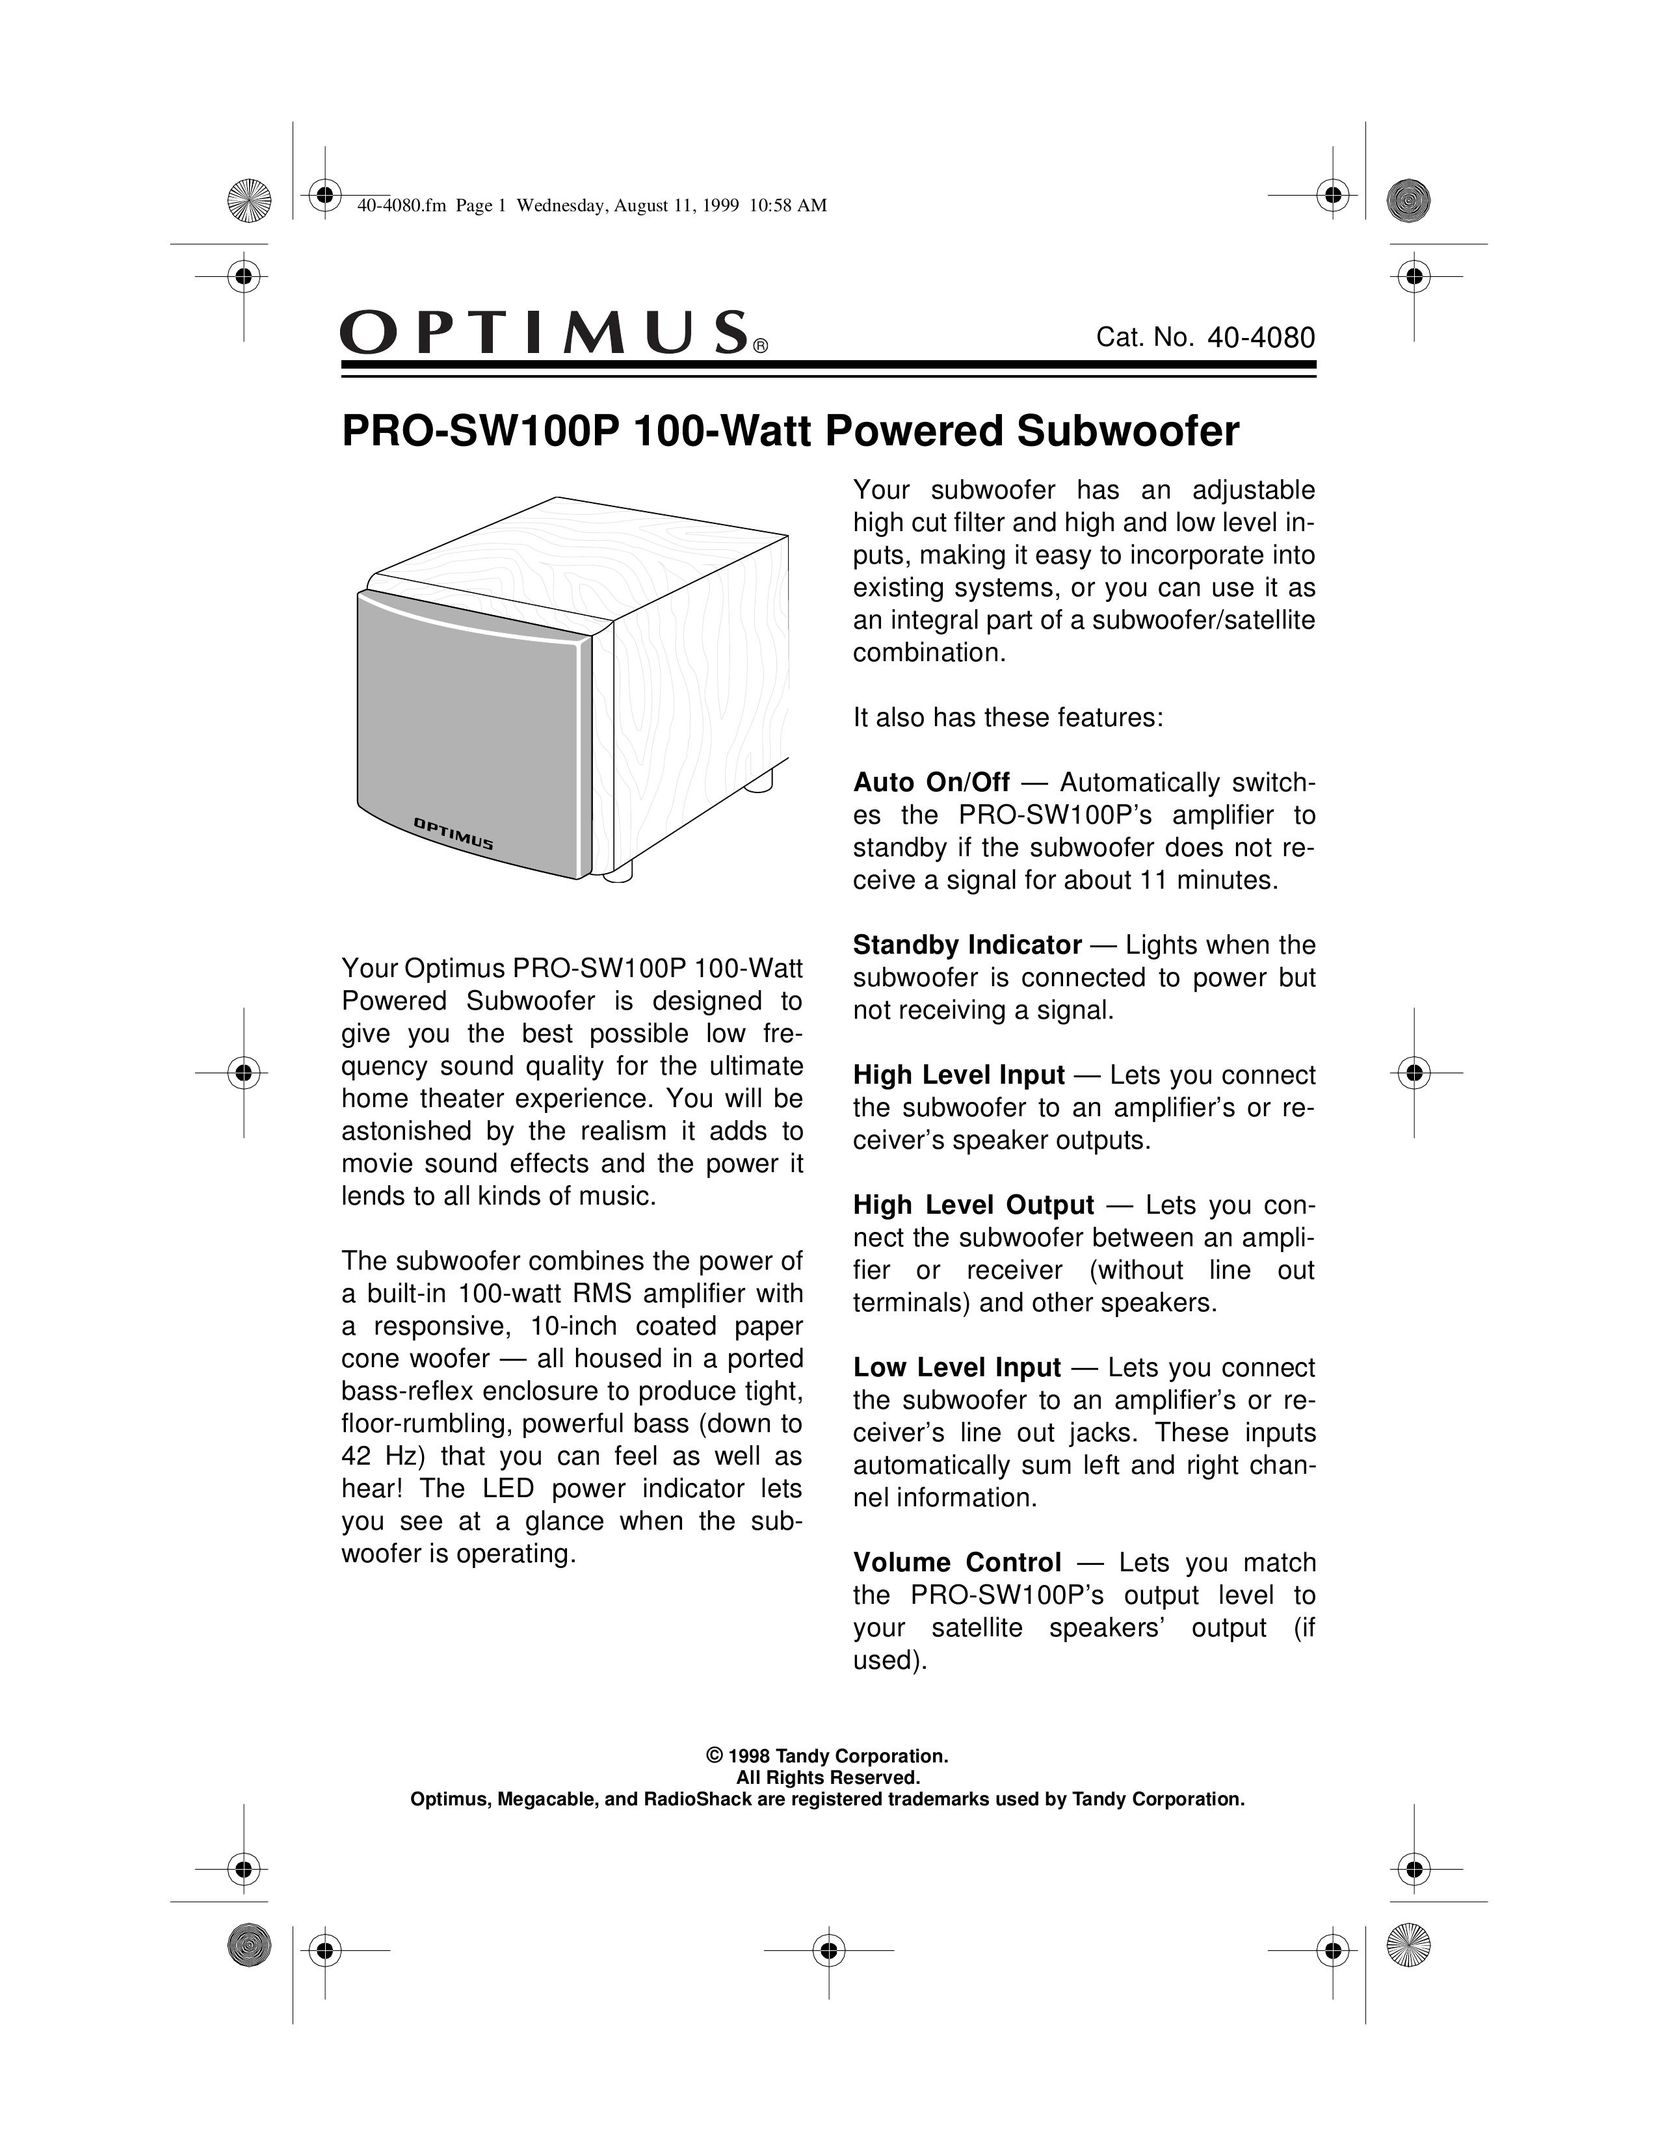 Optimus PRO-SW100P Home Theater System User Manual